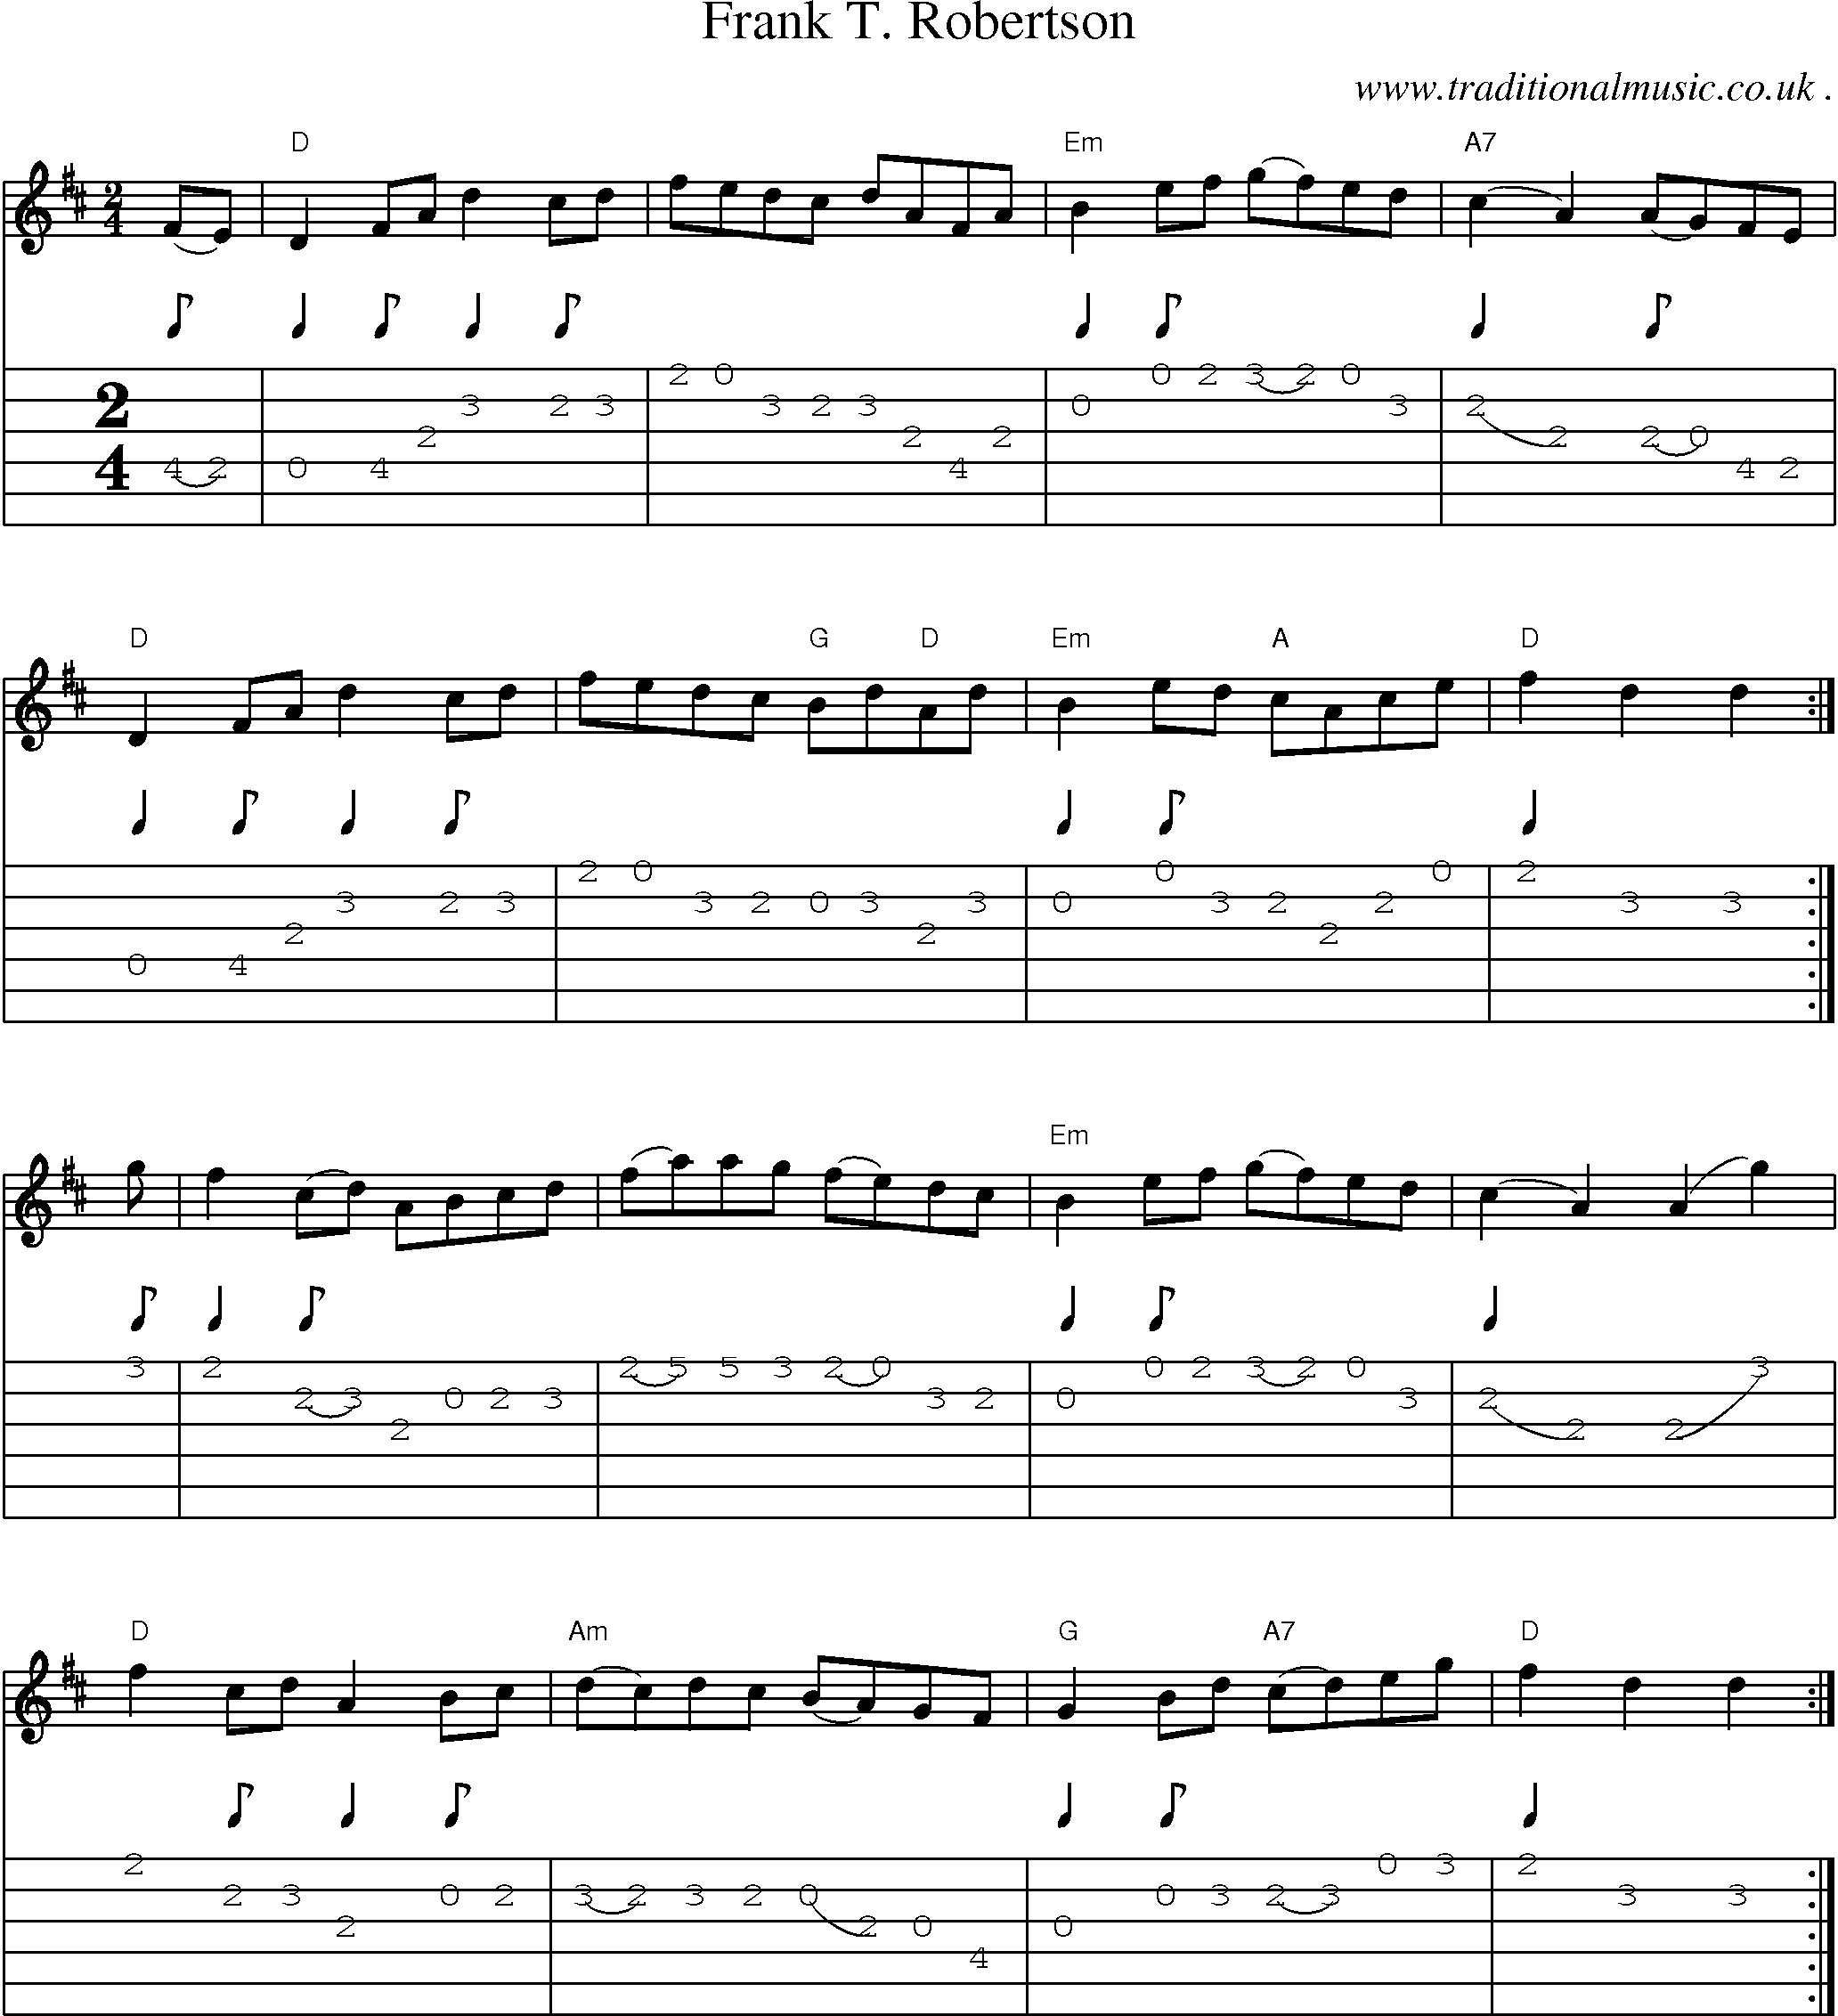 Sheet-music  score, Chords and Guitar Tabs for Frank T Robertson